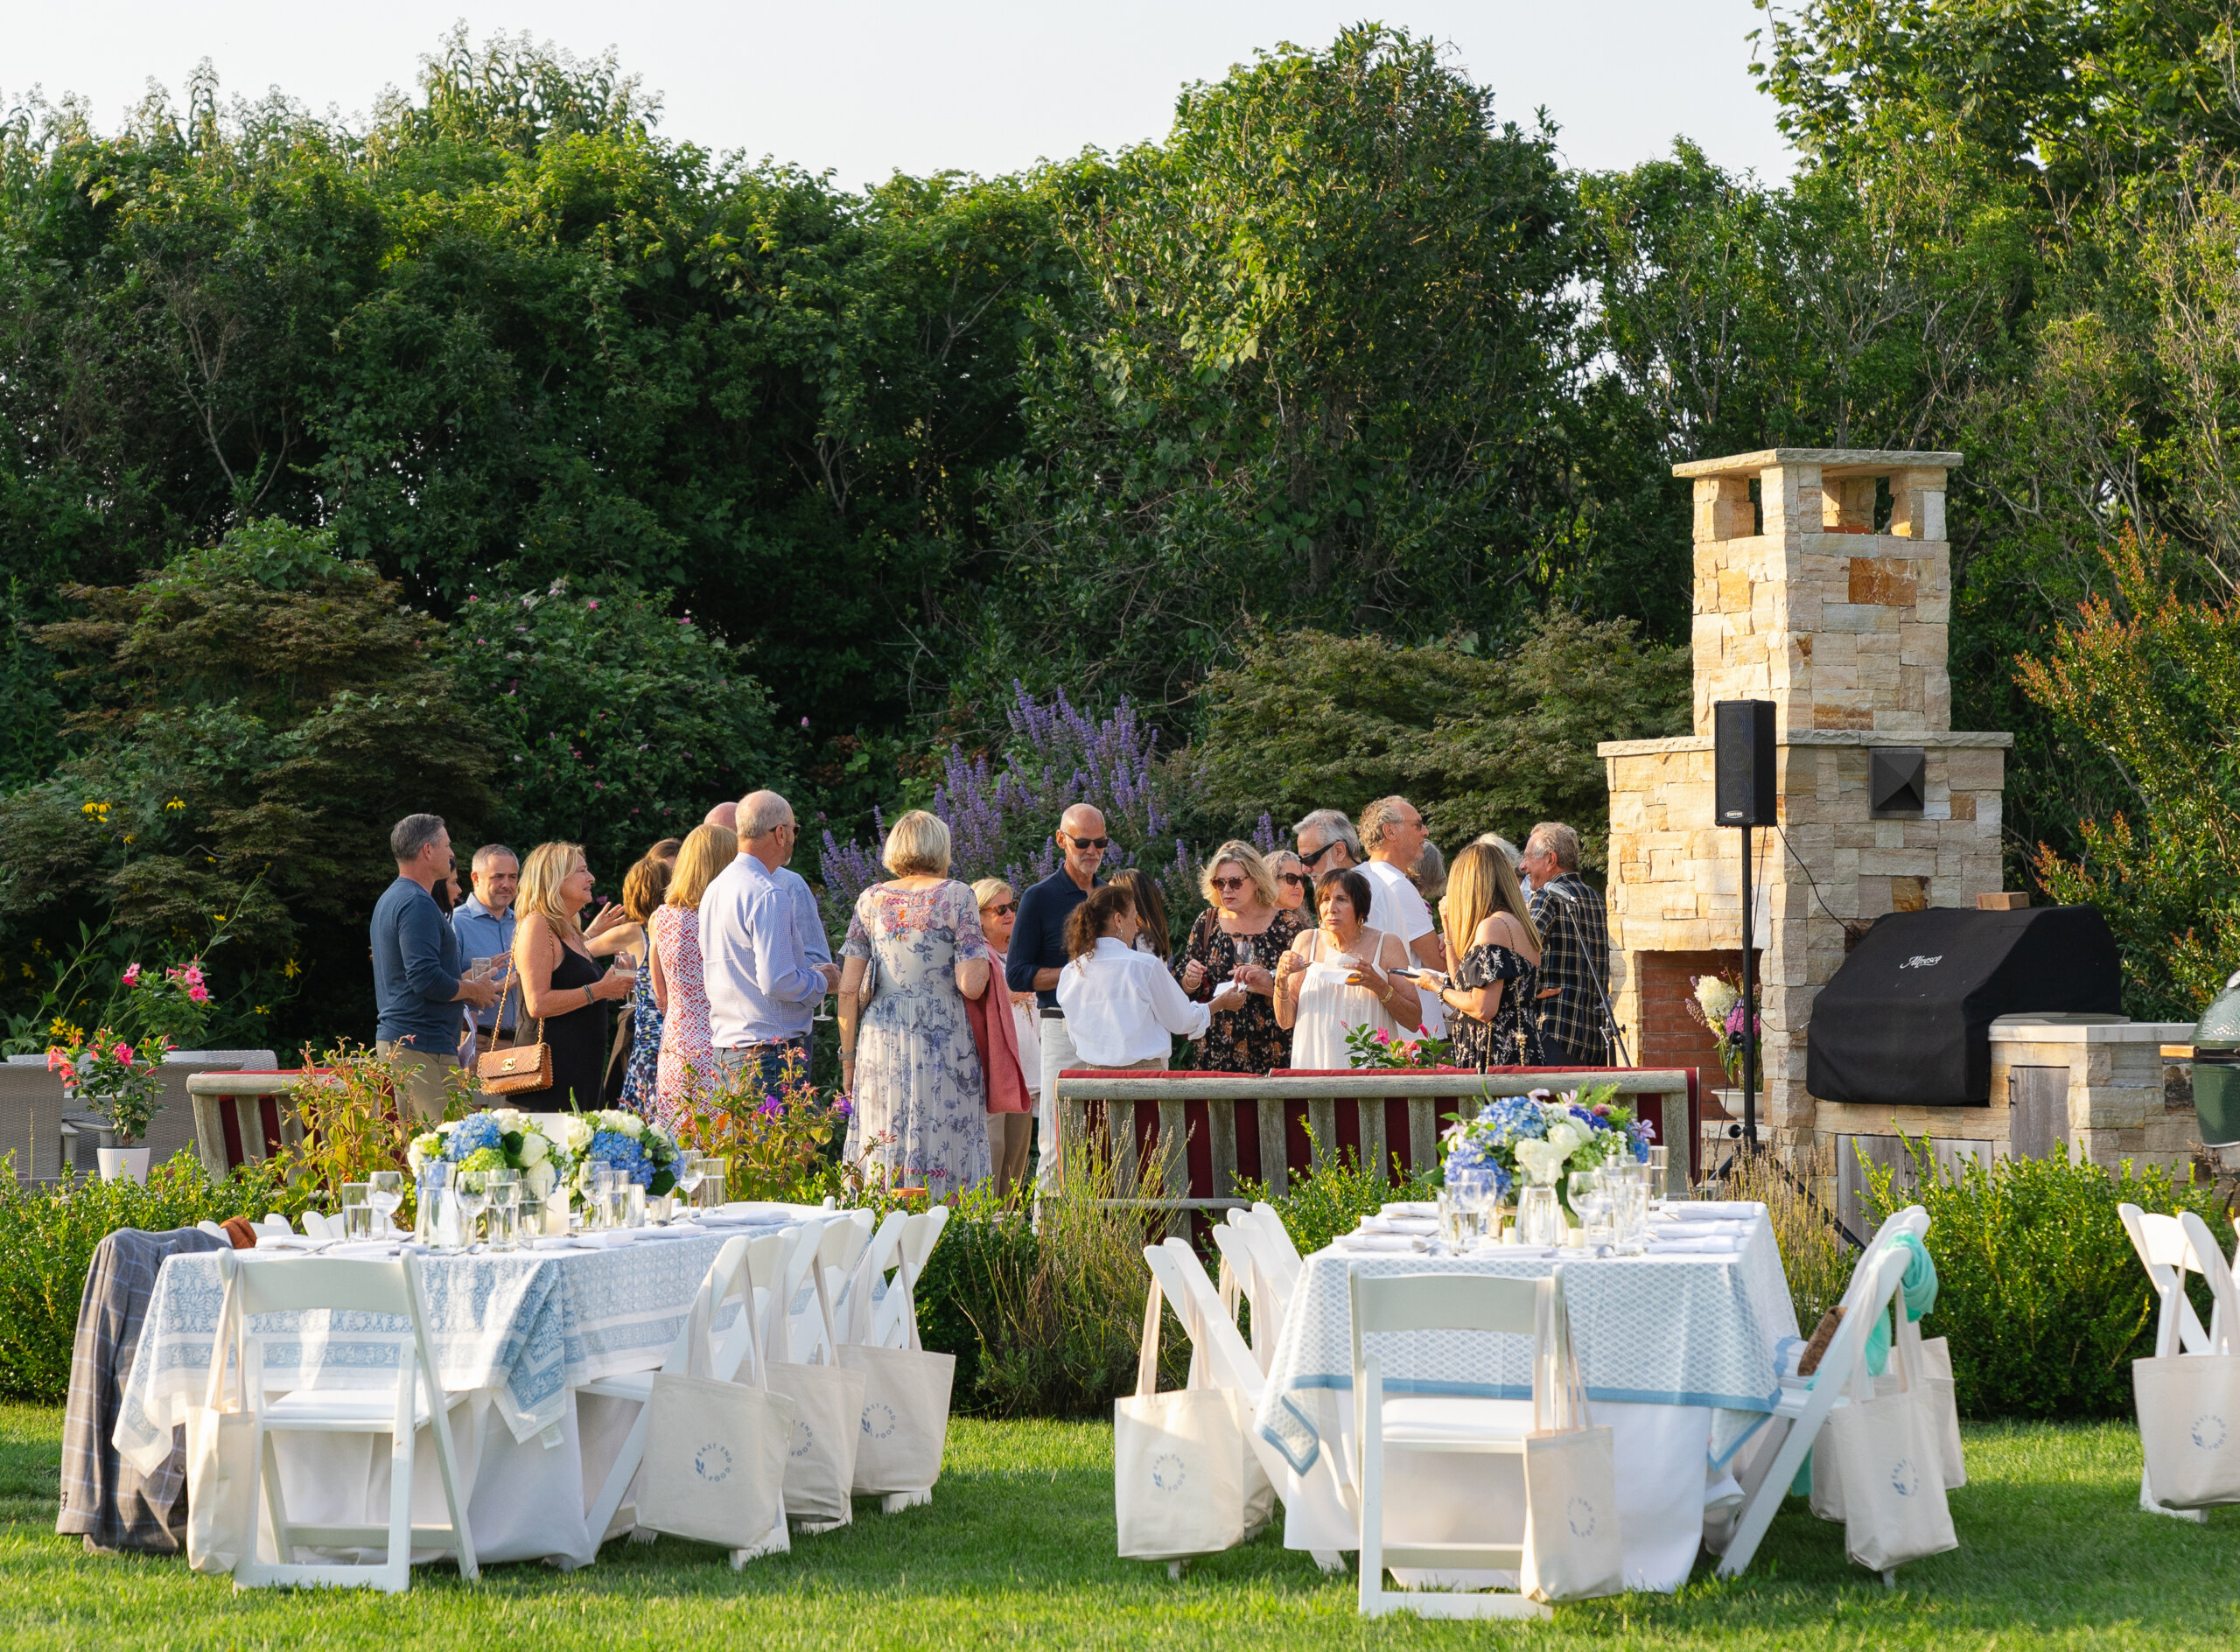 East End Food Hub was officially launched at a special party in Sagaponack on Sunday